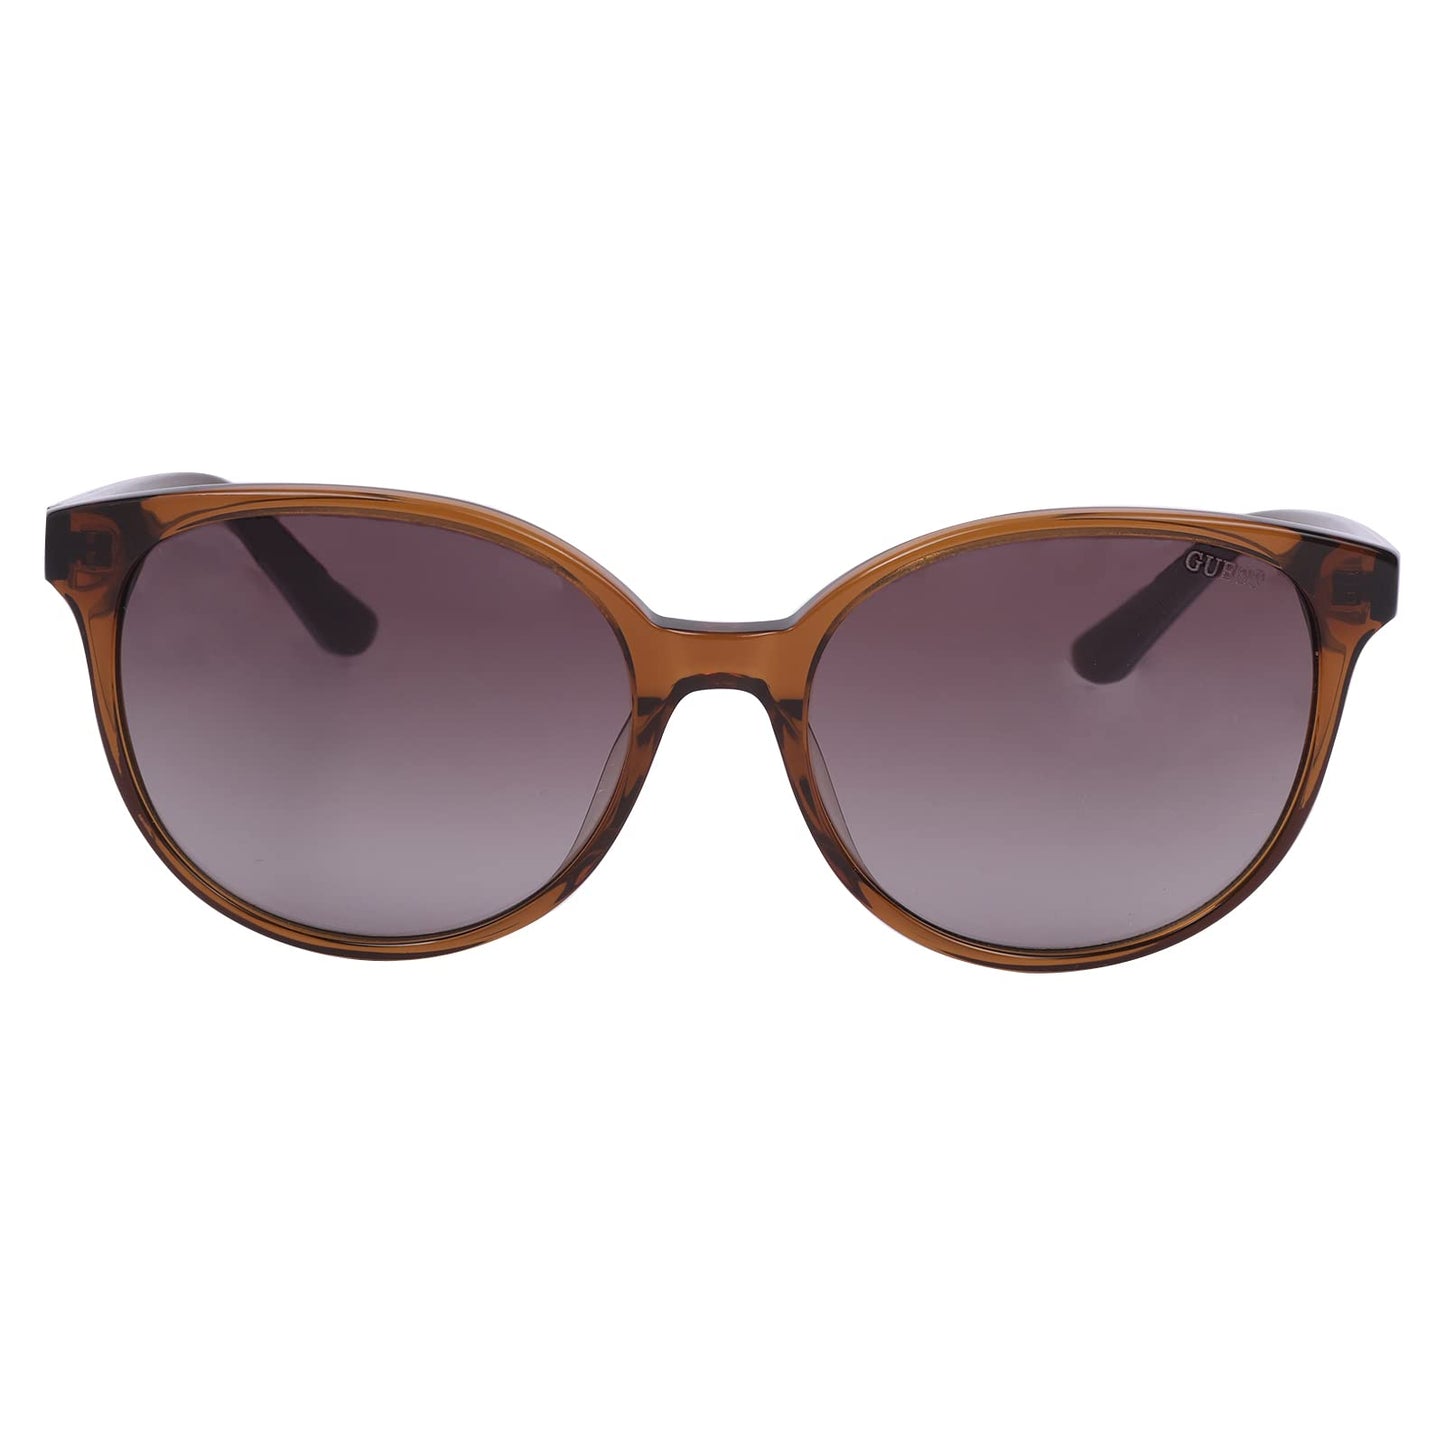 GUESS Gradient Butterfly Women's Sunglasses 7383 45F|58|Brown Color Lens